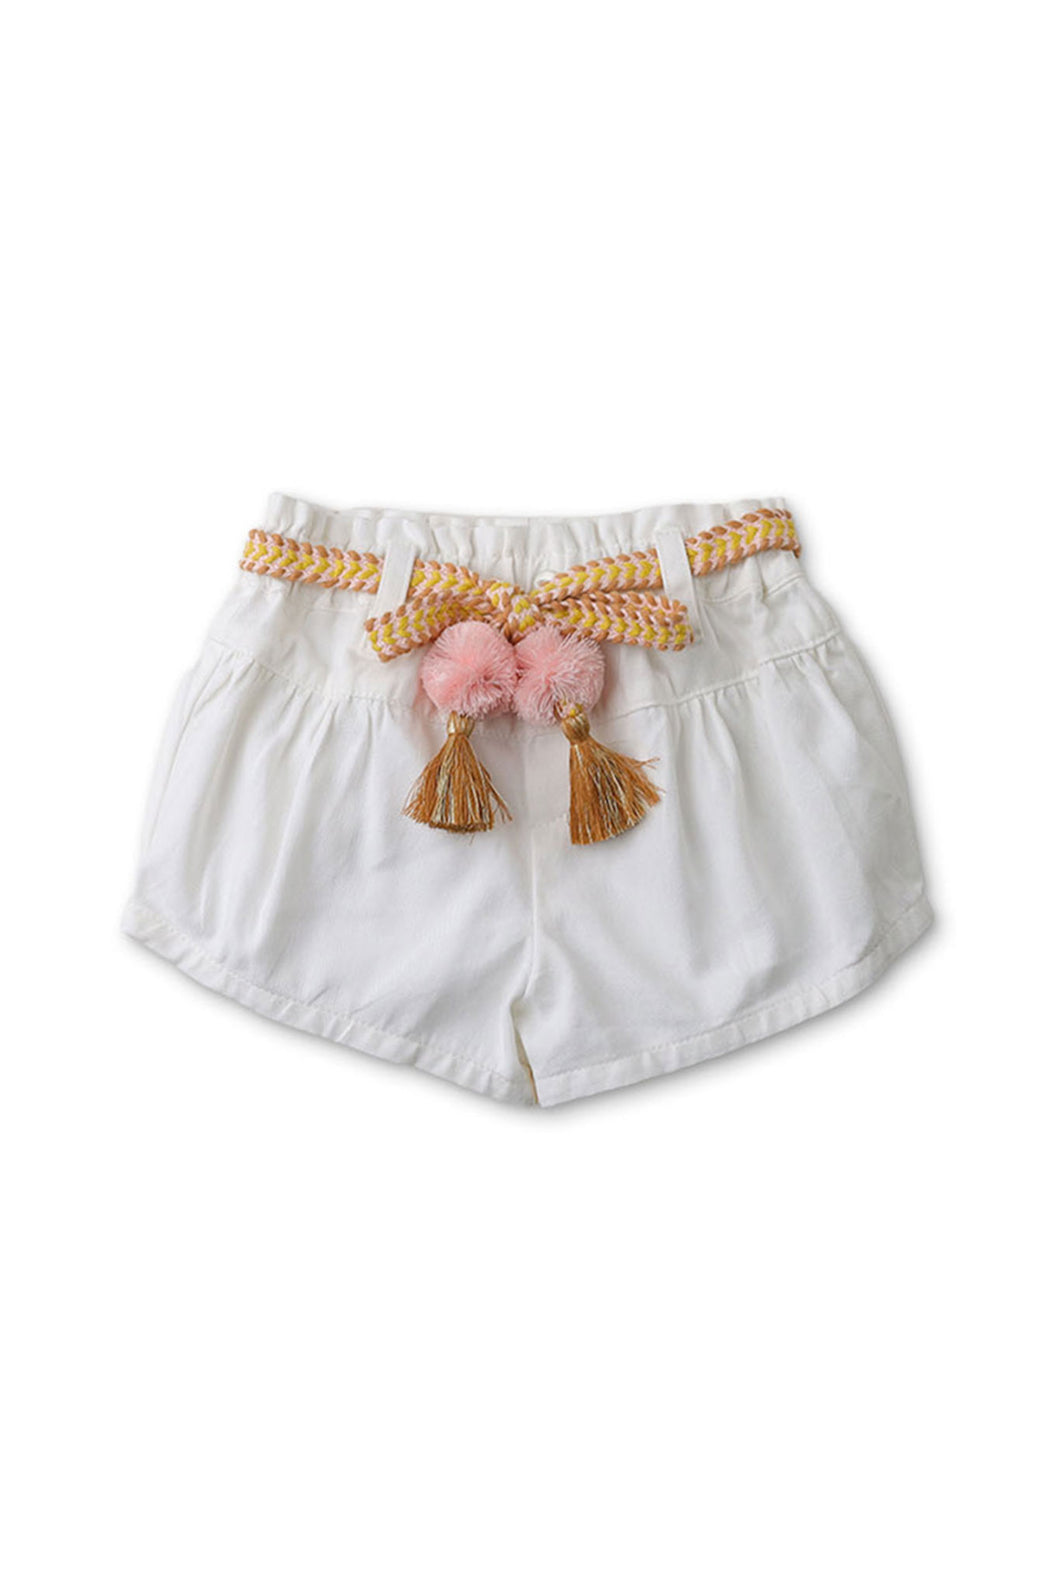 Gingersnaps Paper Bag Shorts with Belt